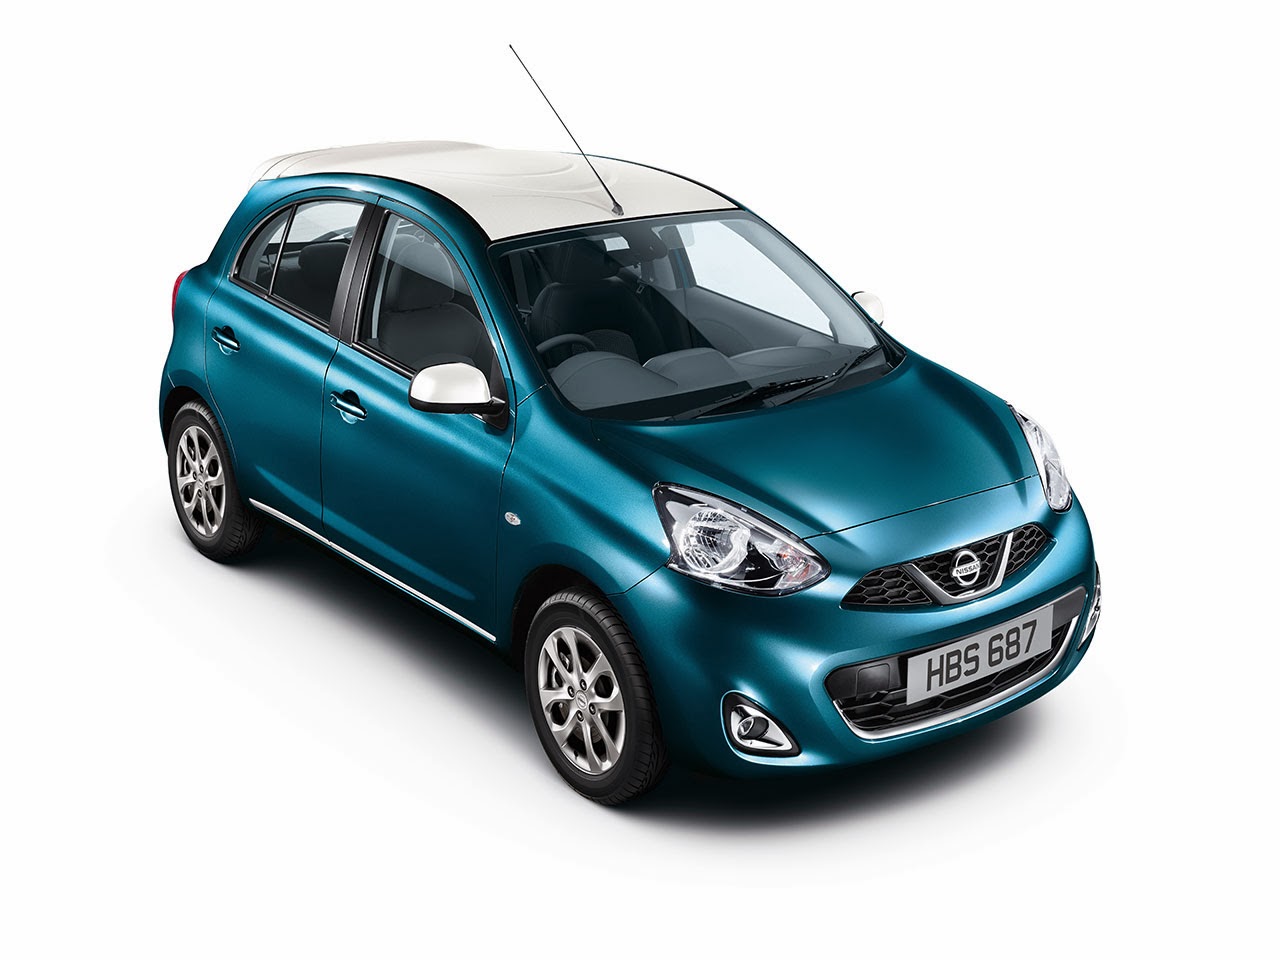 Nissan Limited Edition Micra blue